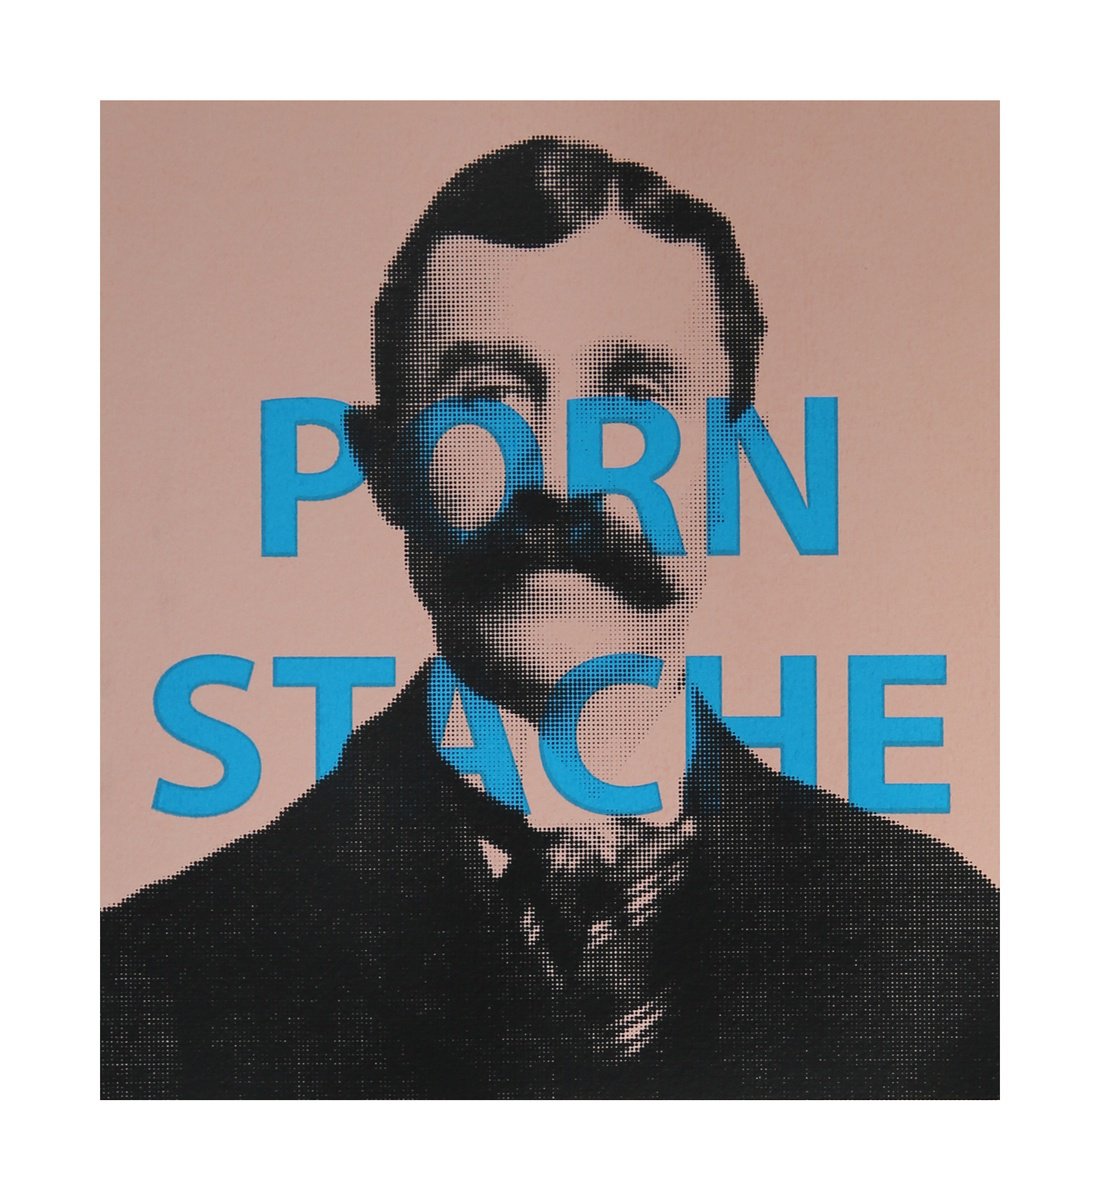 PORN STACHE (Light Pink & Brilliant Blue) by AAWatson